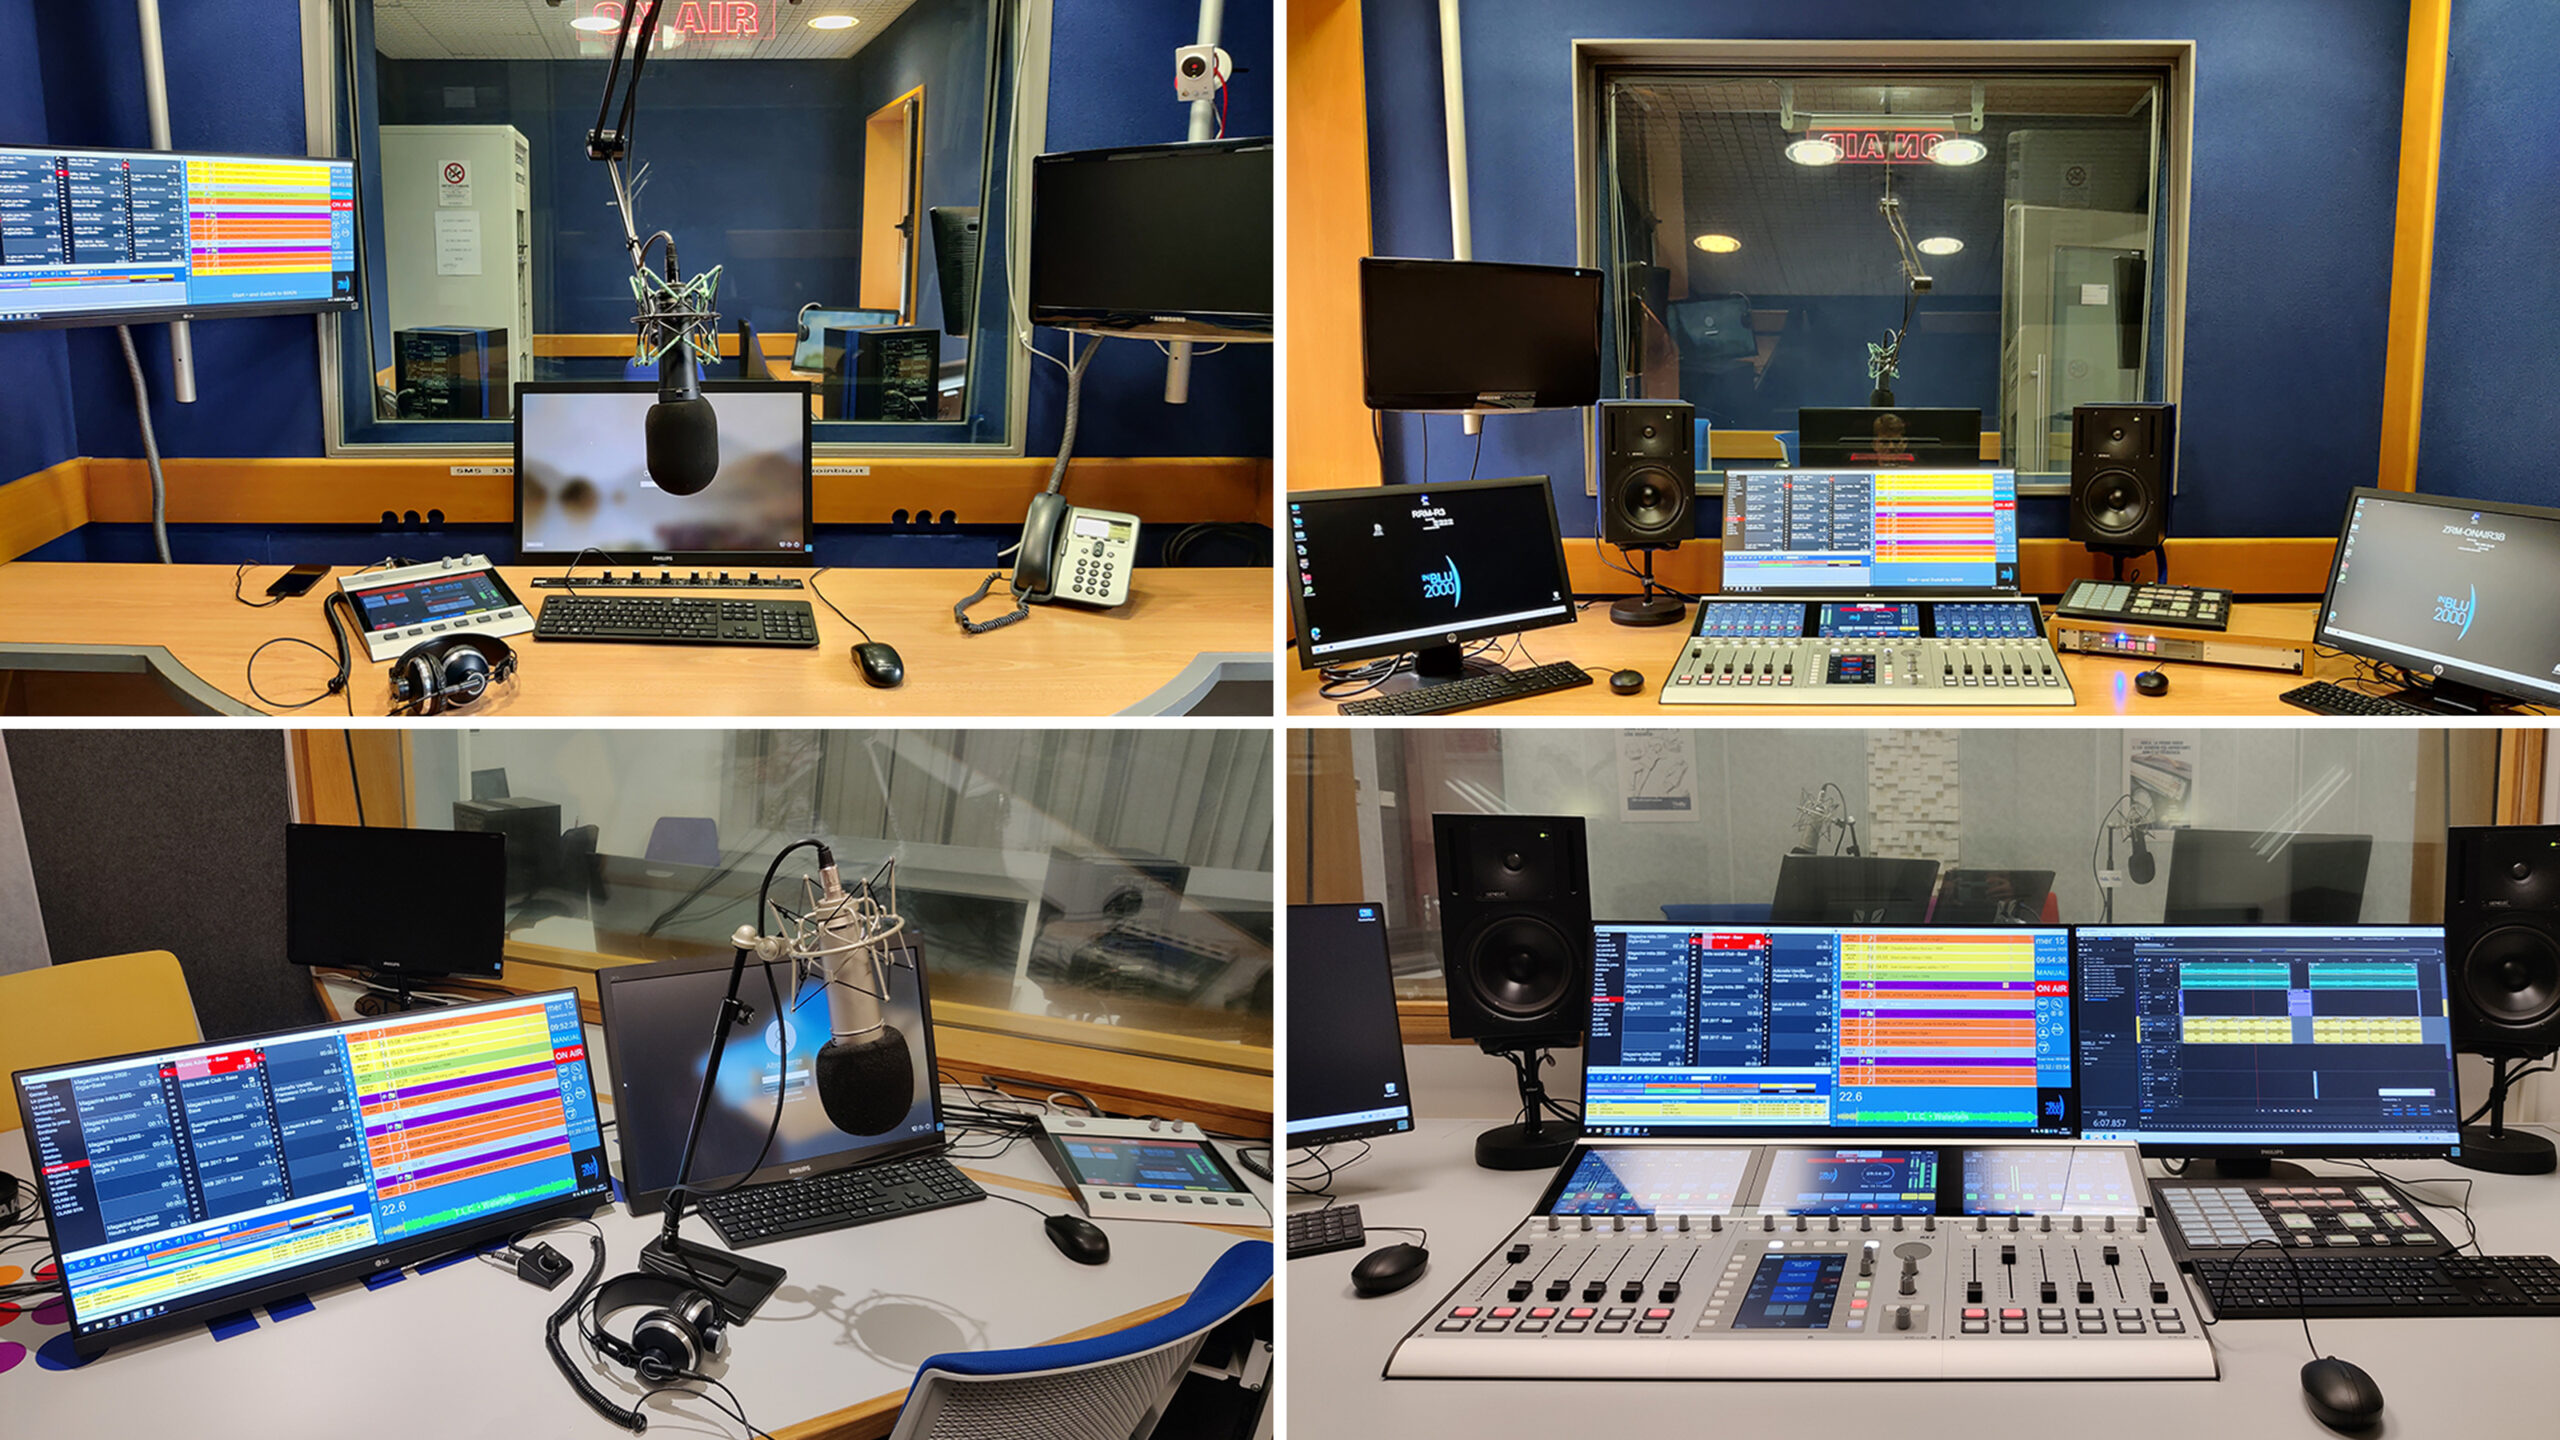 DHD audio reports the completion of a major update to the Rome-based production facilities of Italian radio and internet broadcast InBlu2000 tkt1957.com